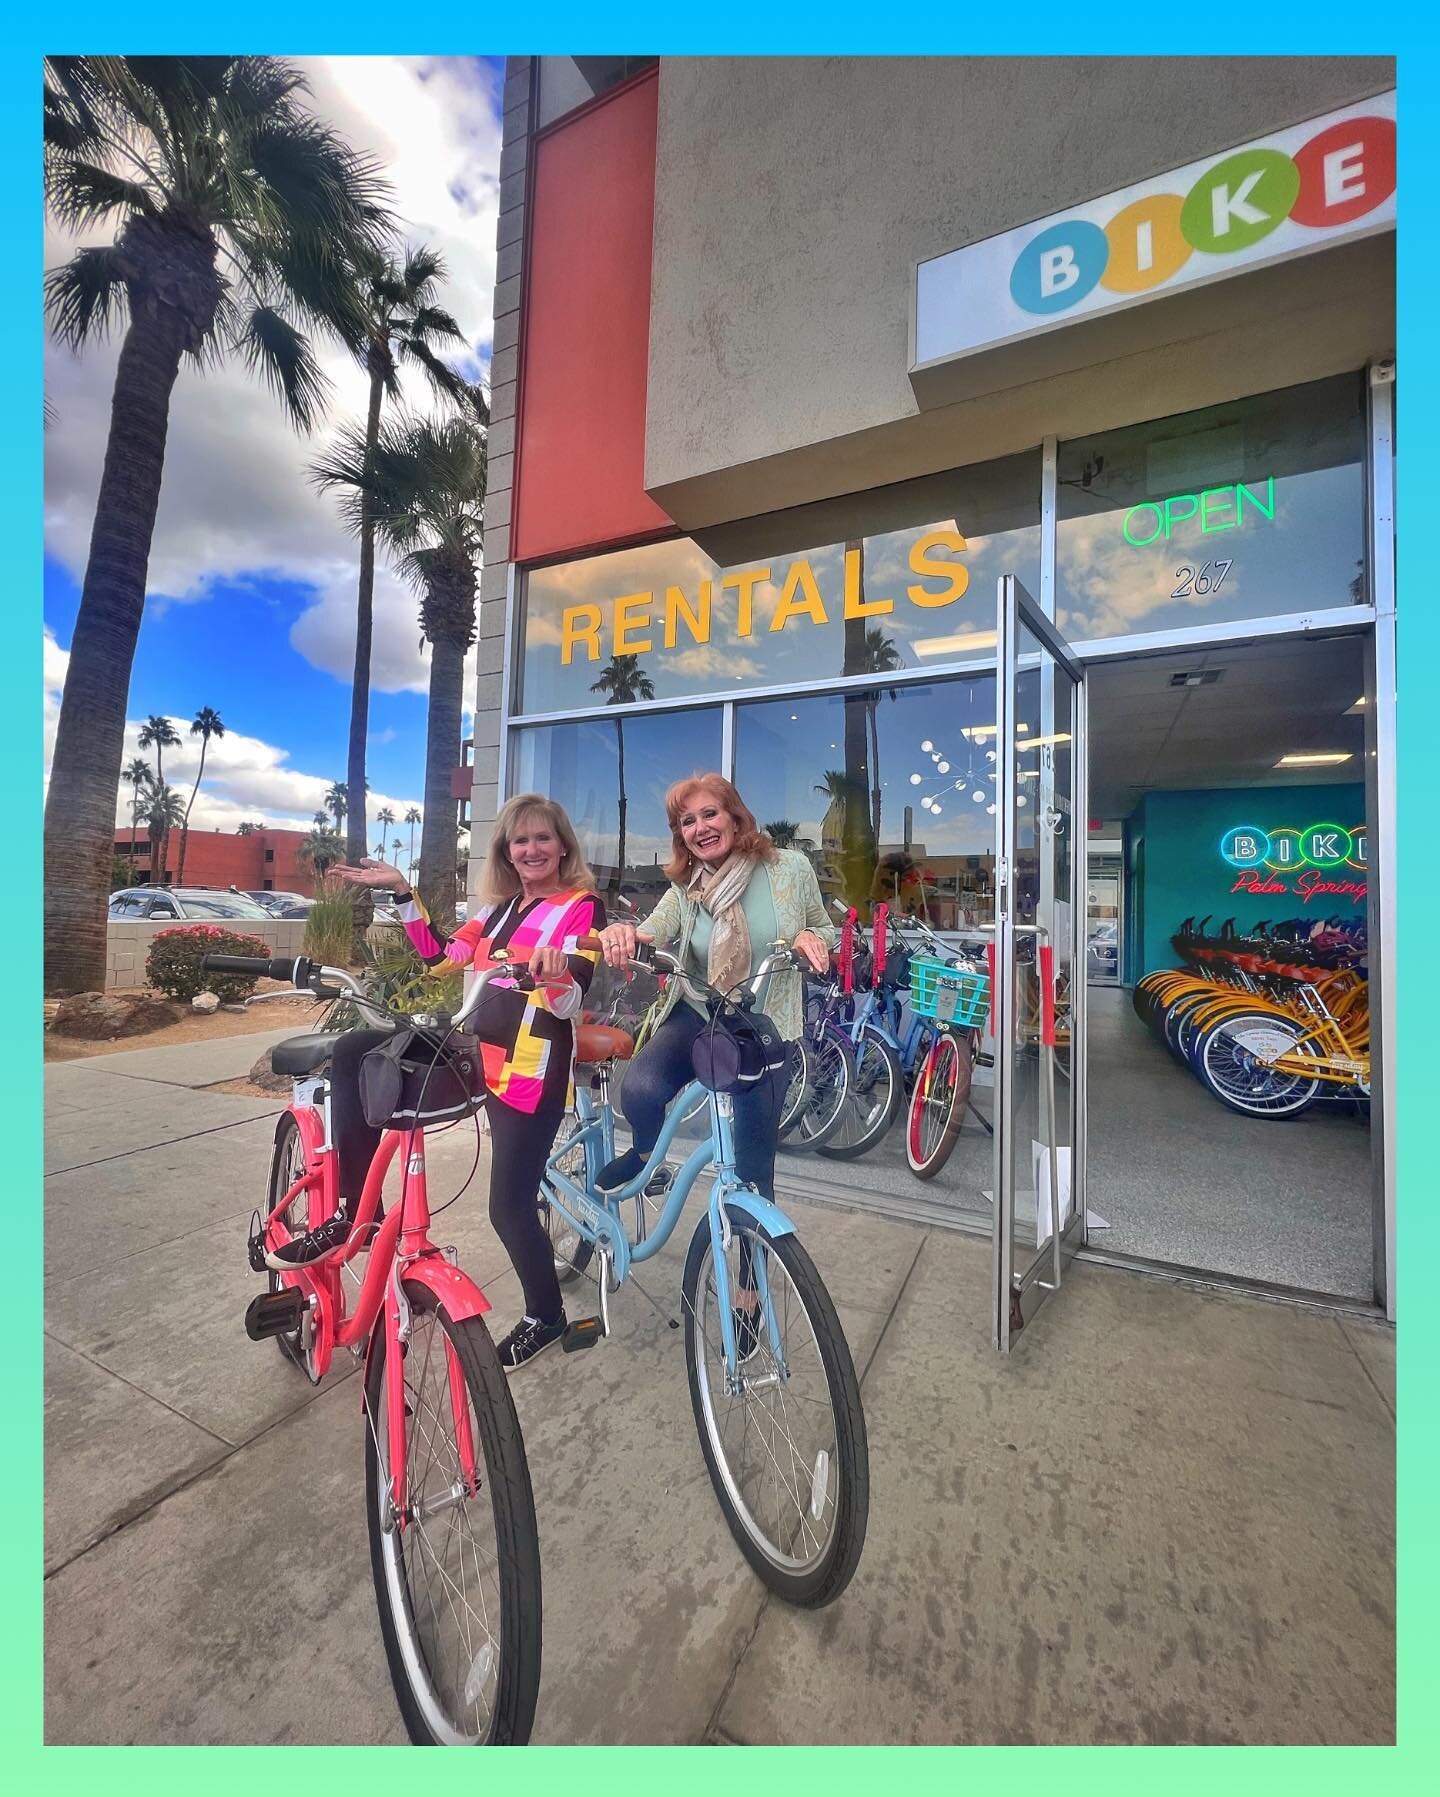 Off the ✈️ and couldn&rsquo;t wait for a 🚲 ride! Thank you @kcummins for the support and introducing us to to your lovely friend! What a great treat to have you join us again! 💖
.
.
.
.
#bikerental #bikeservice #bikeride #summerfun #socialdistancin